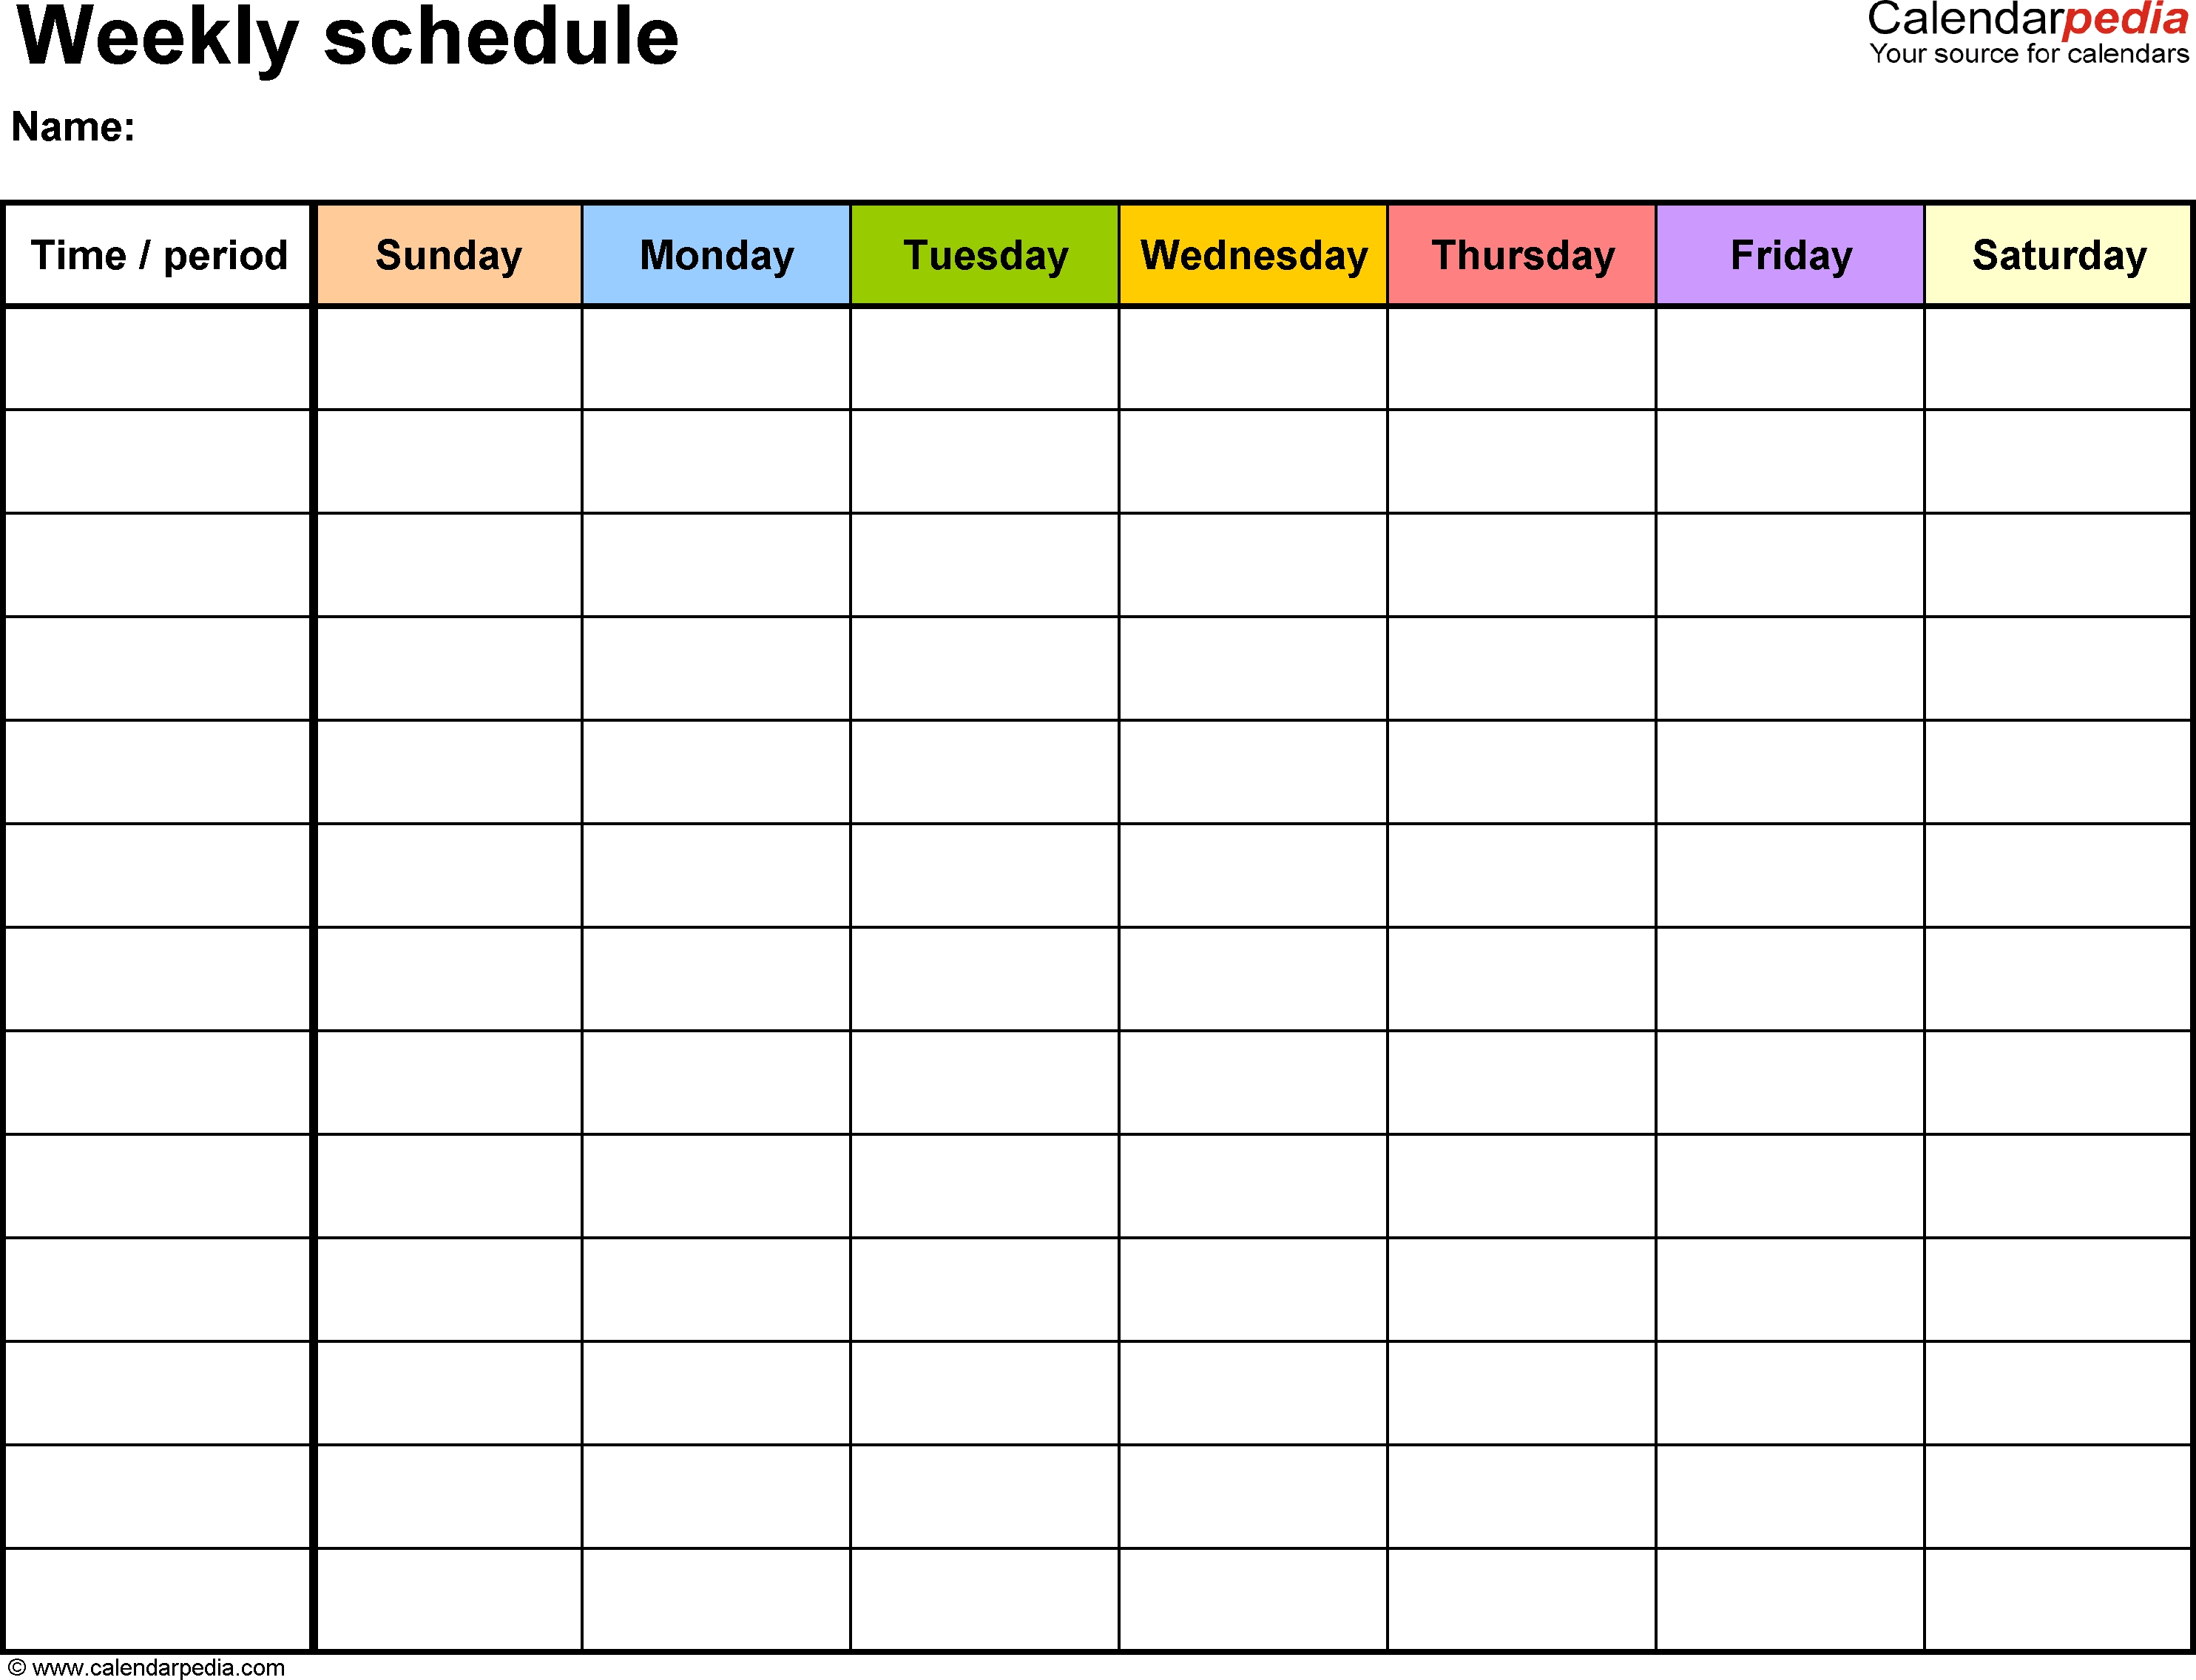 Free Weekly Schedule Templates For Excel - 18 Templates | ~Yoga within Free Printable Blank Weekly Calendar Templates